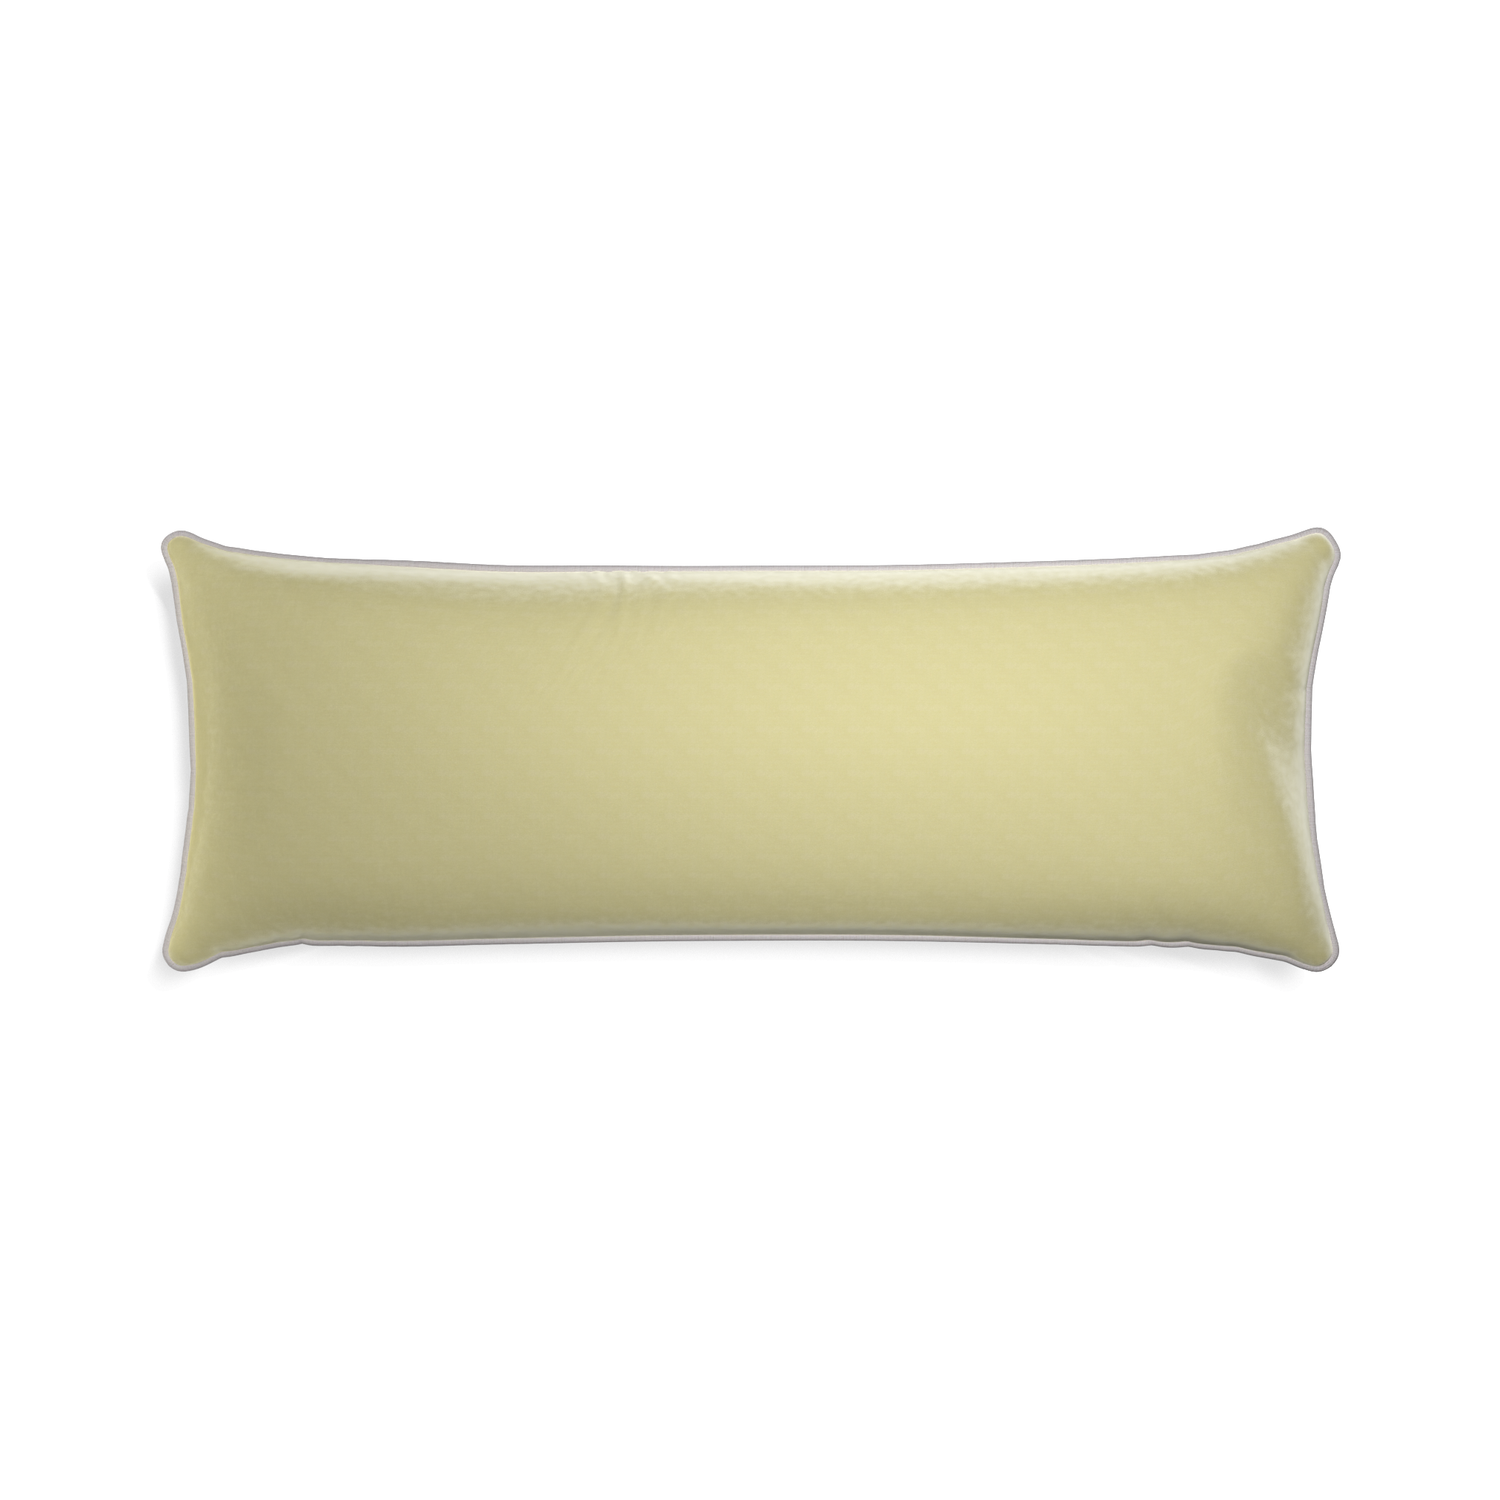 Xl-lumbar pear velvet custom pillow with pebble piping on white background